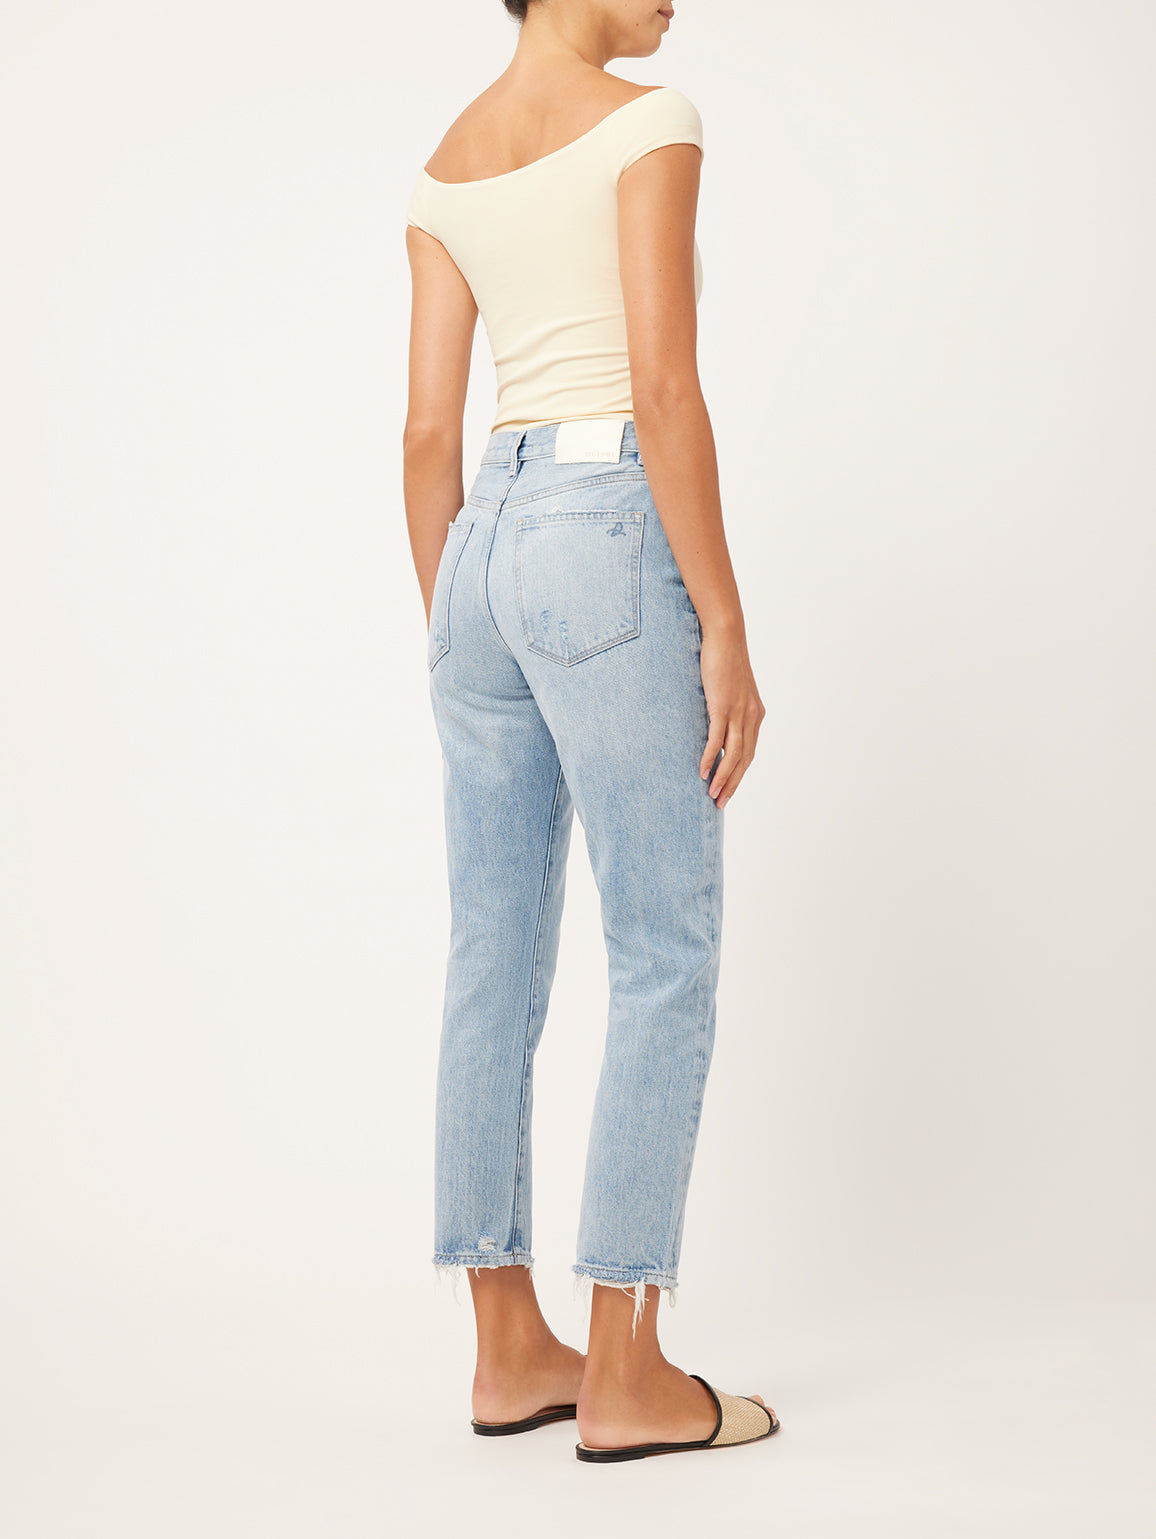 Straight Up Petite High Waisted Straight Leg Jeans in Medium Blue